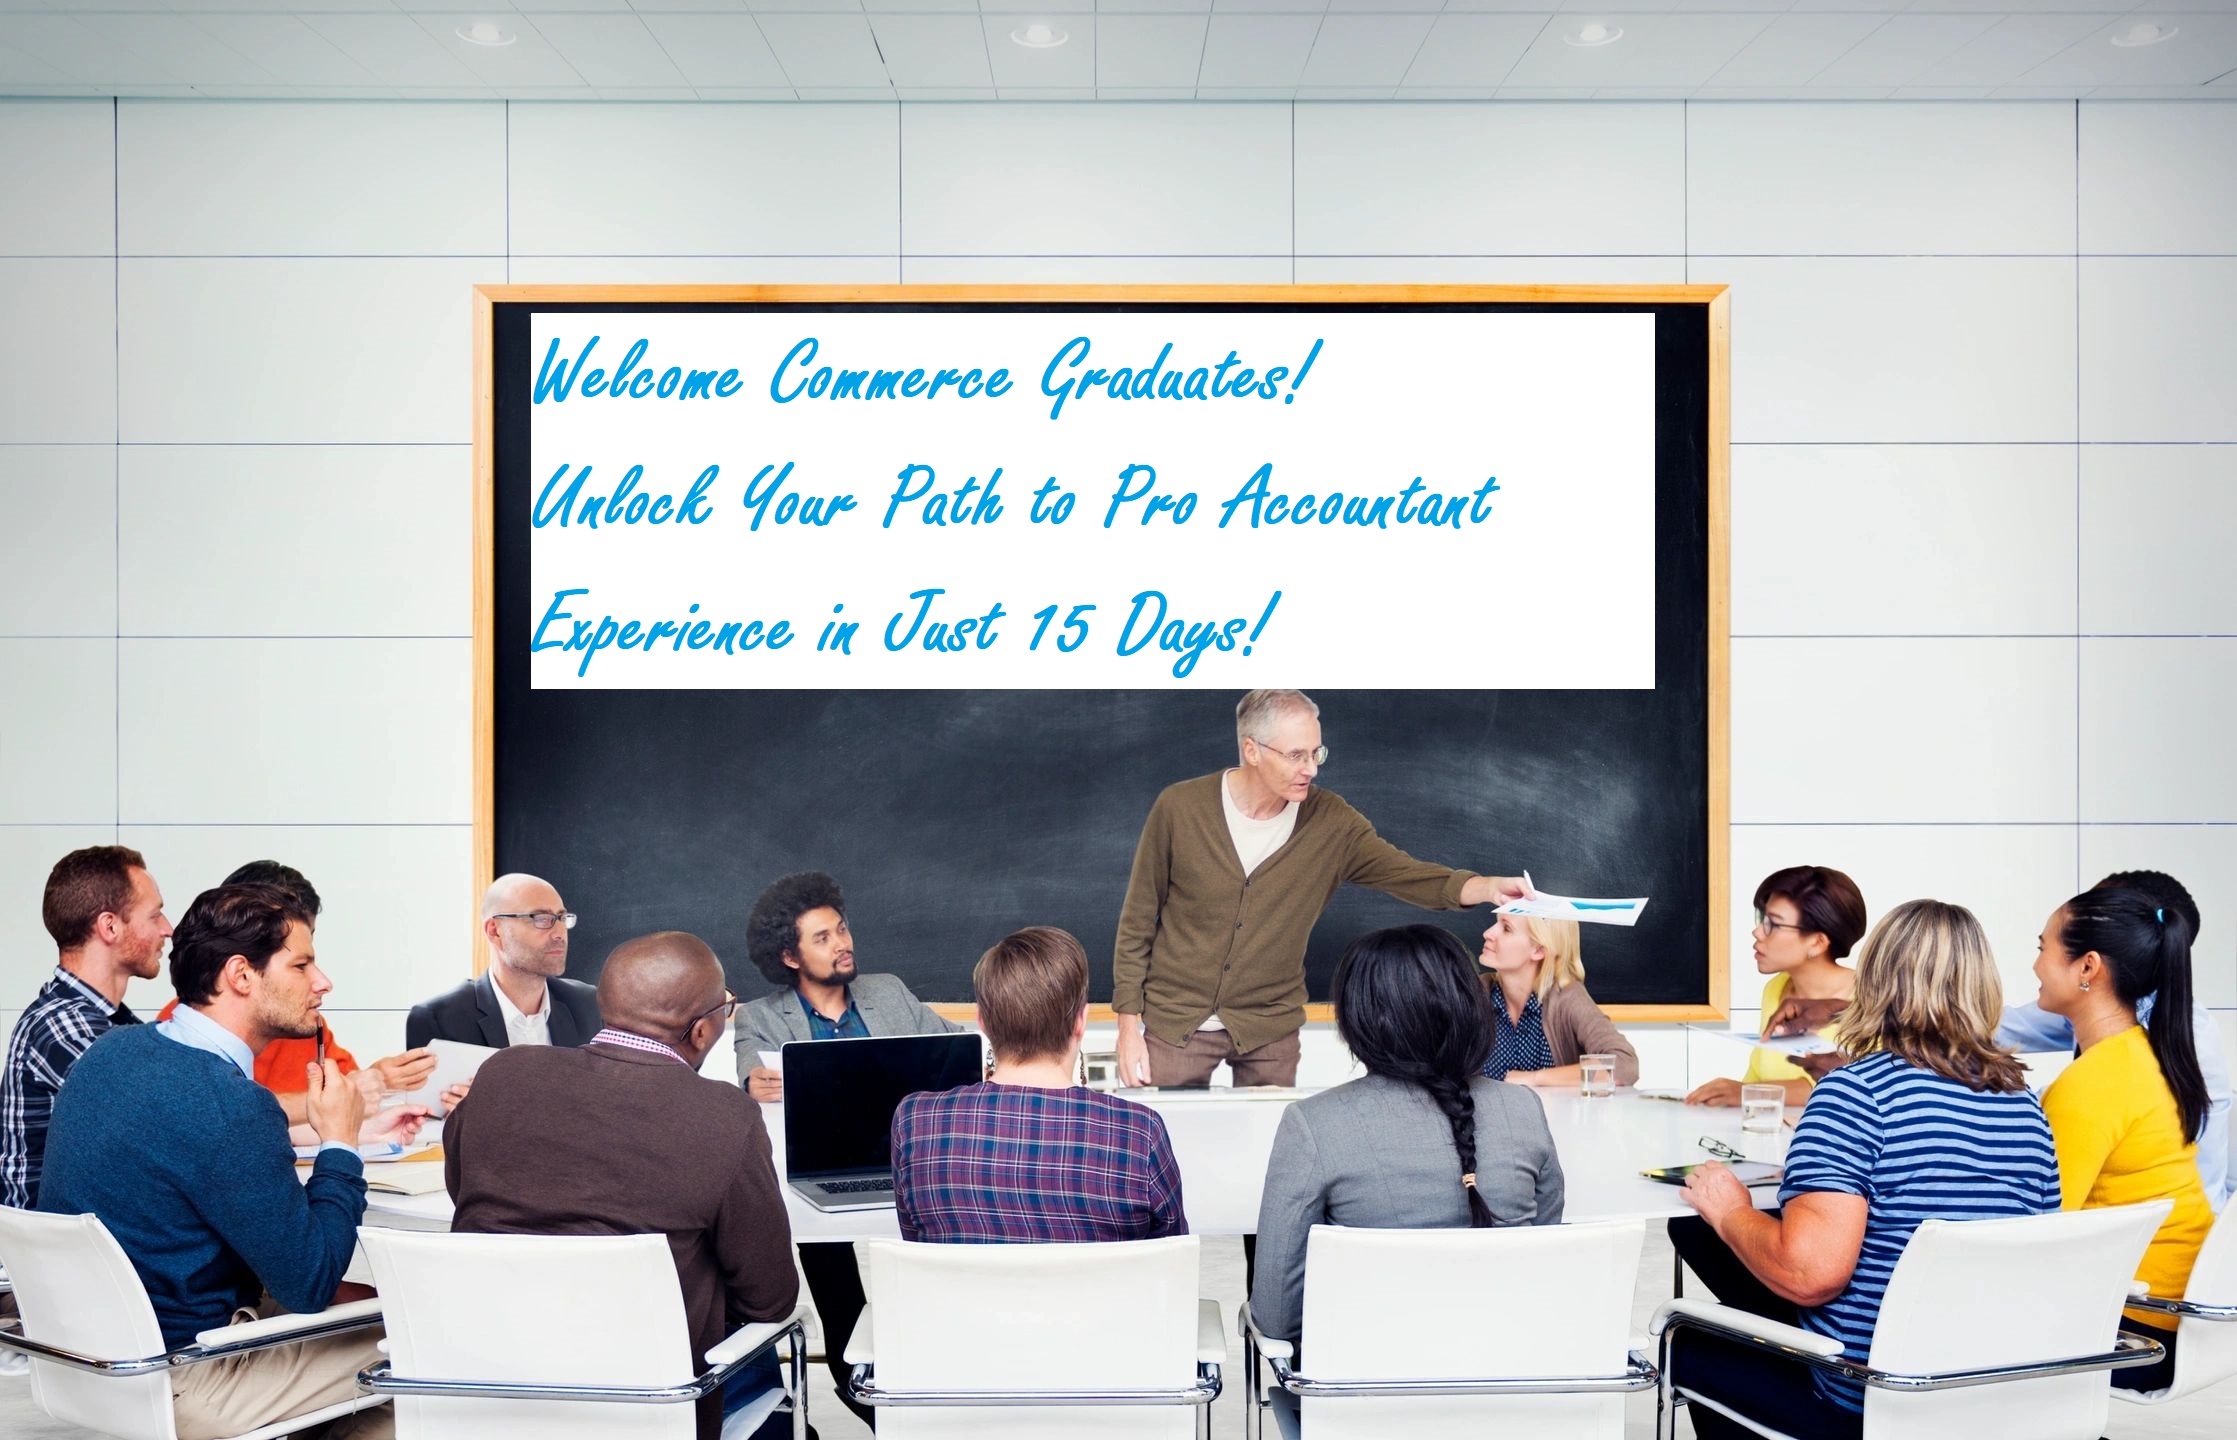 Welcome Commerce Graduates! Unlock Your Path to Pro Accountant Experience in Just 15 Days!